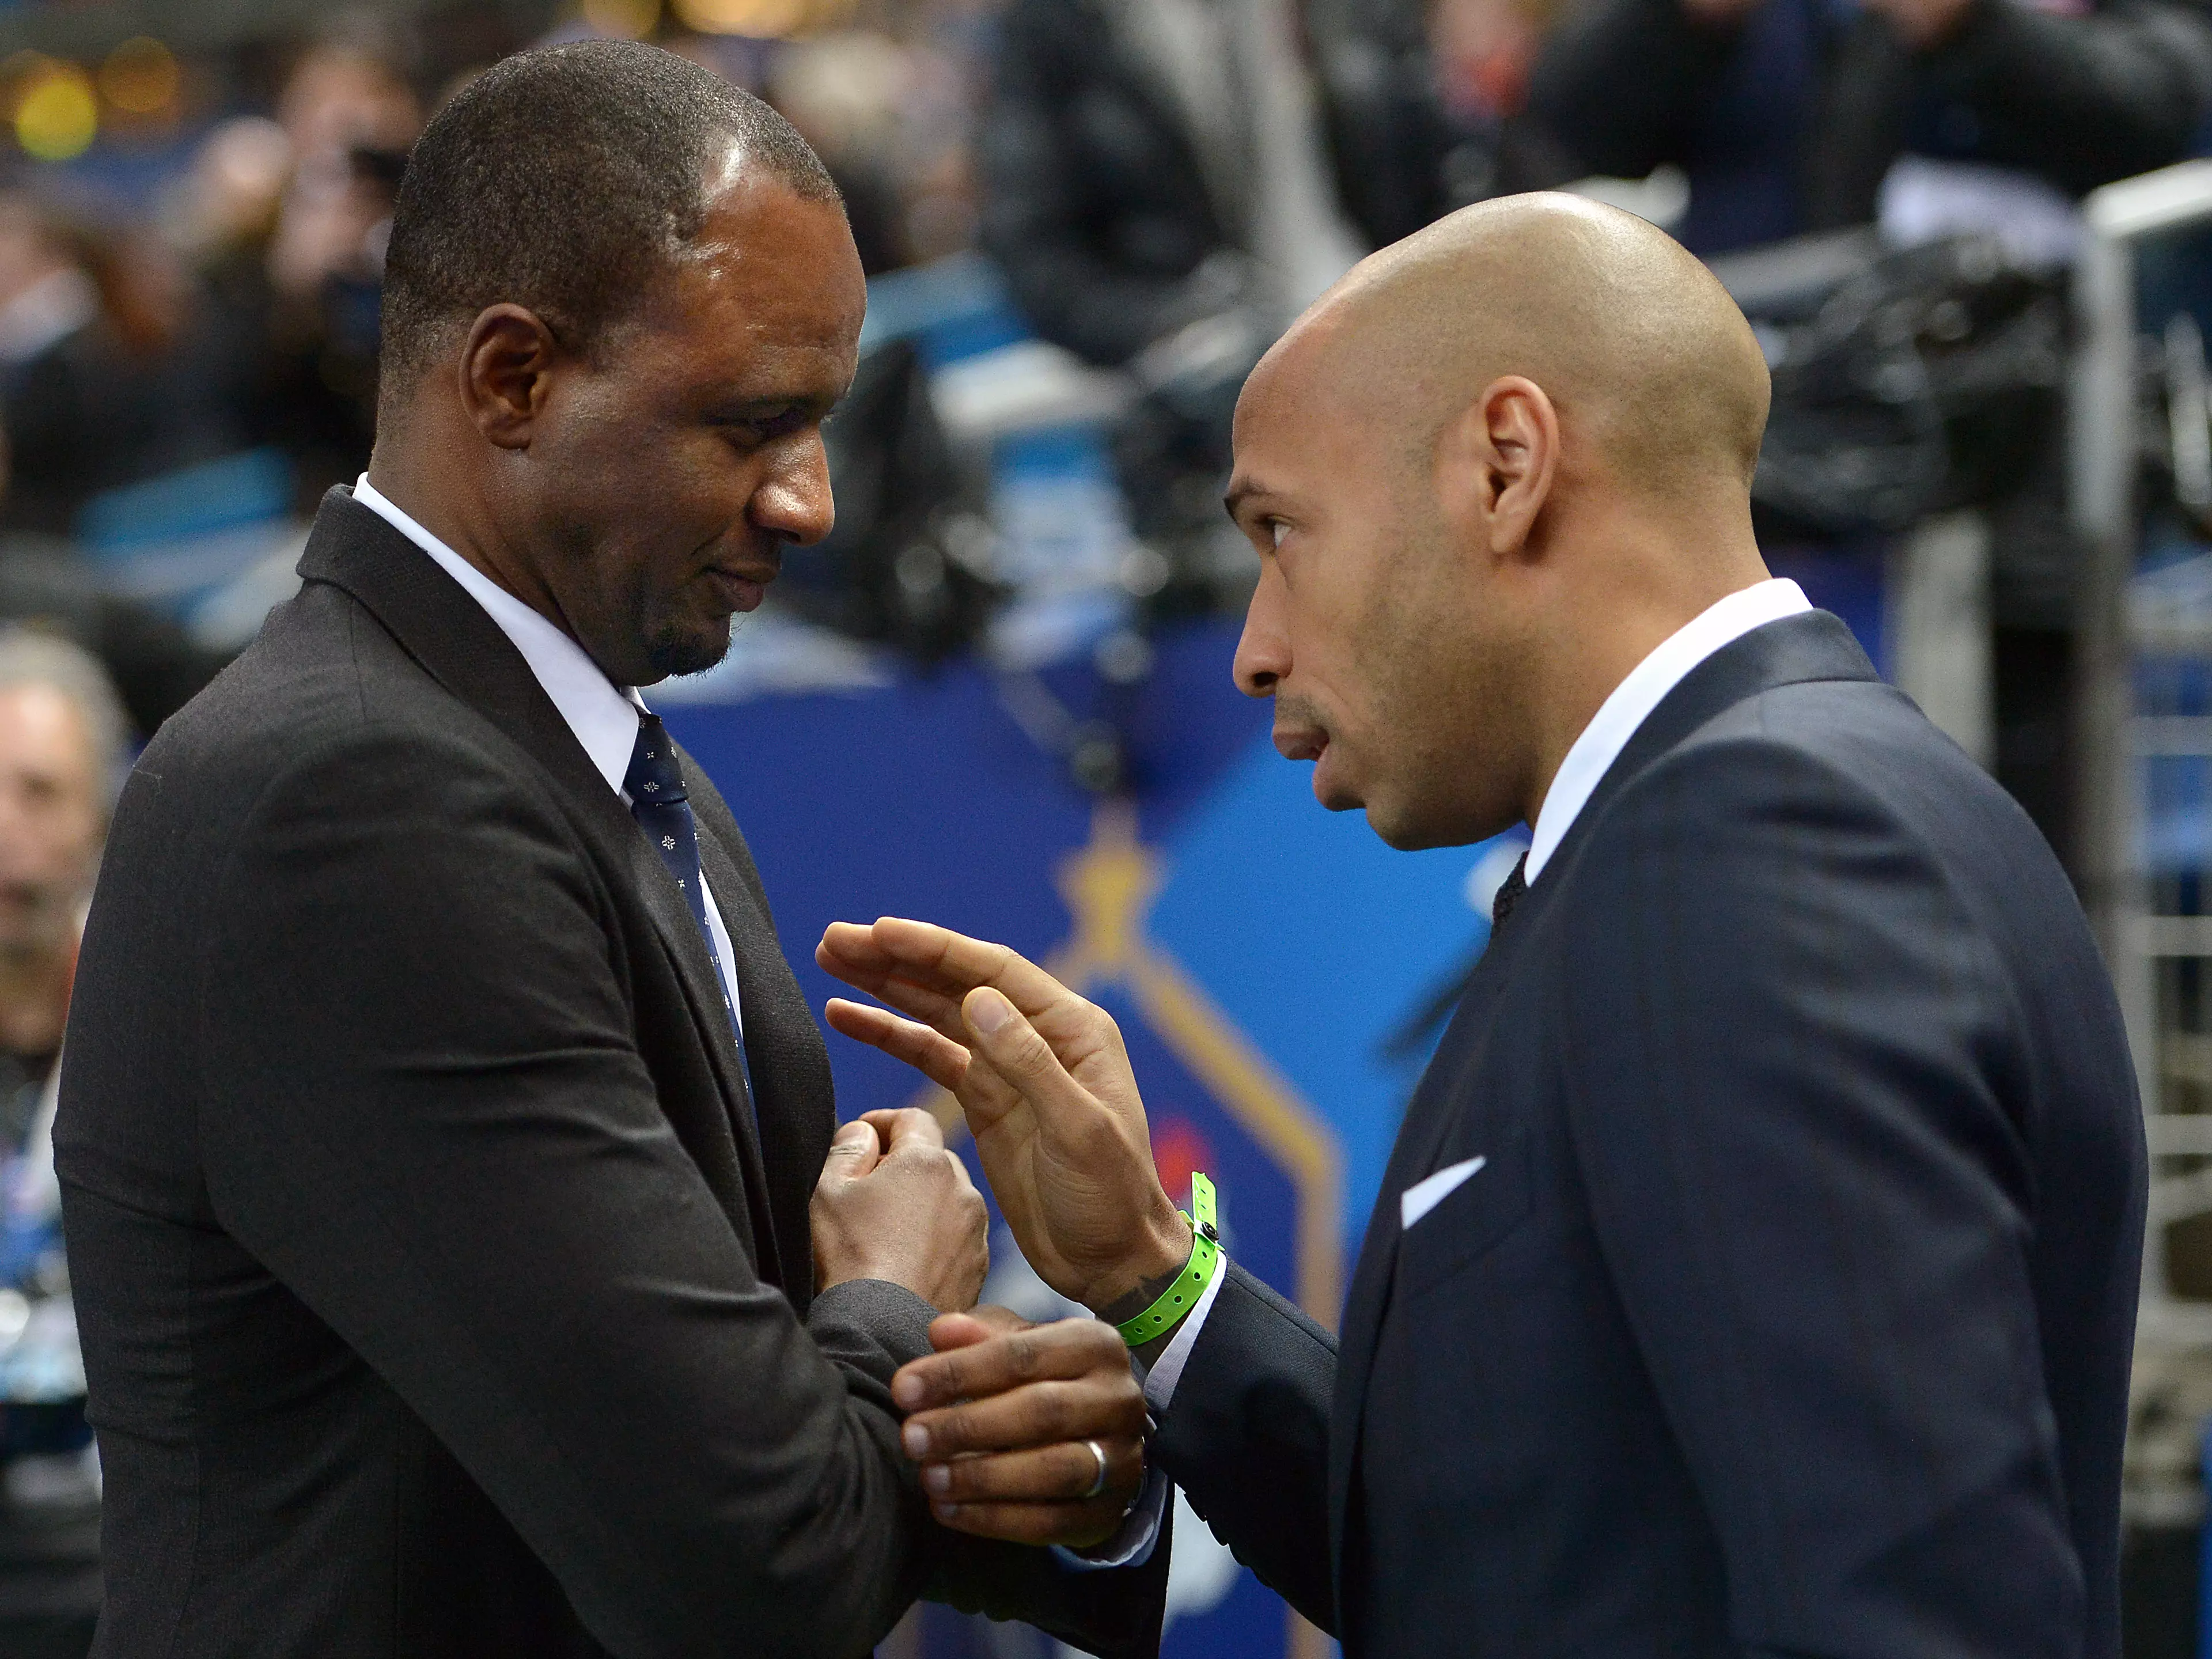 Both Thierry Henry and Patrick Vieira were considered for the Arsenal role